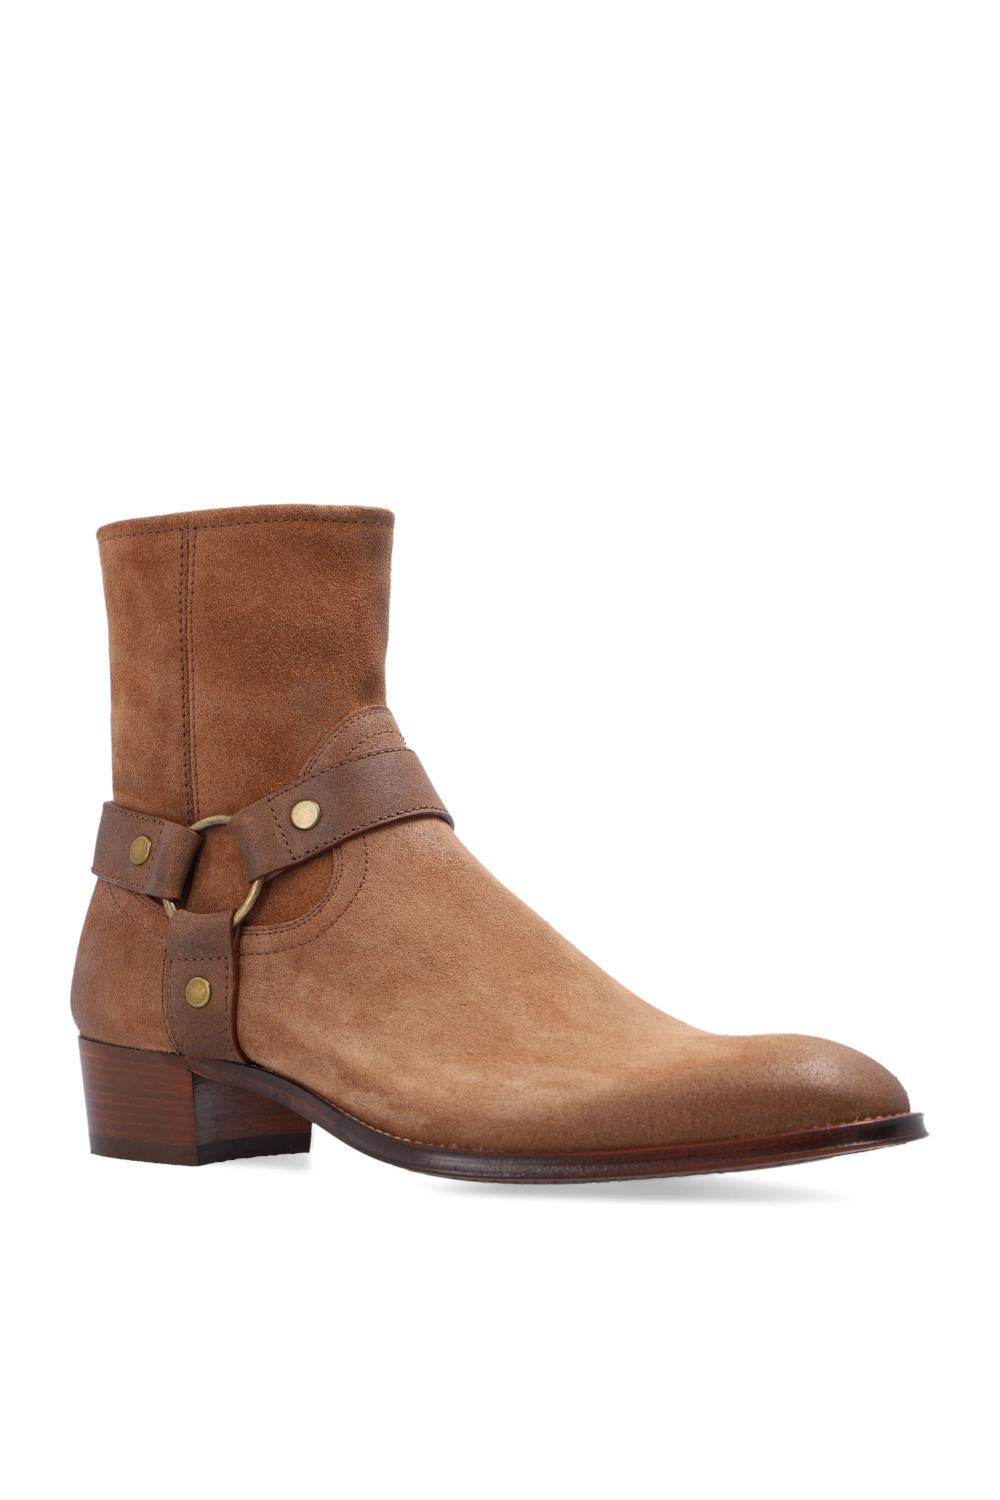 'wyatt' Ankle Boots